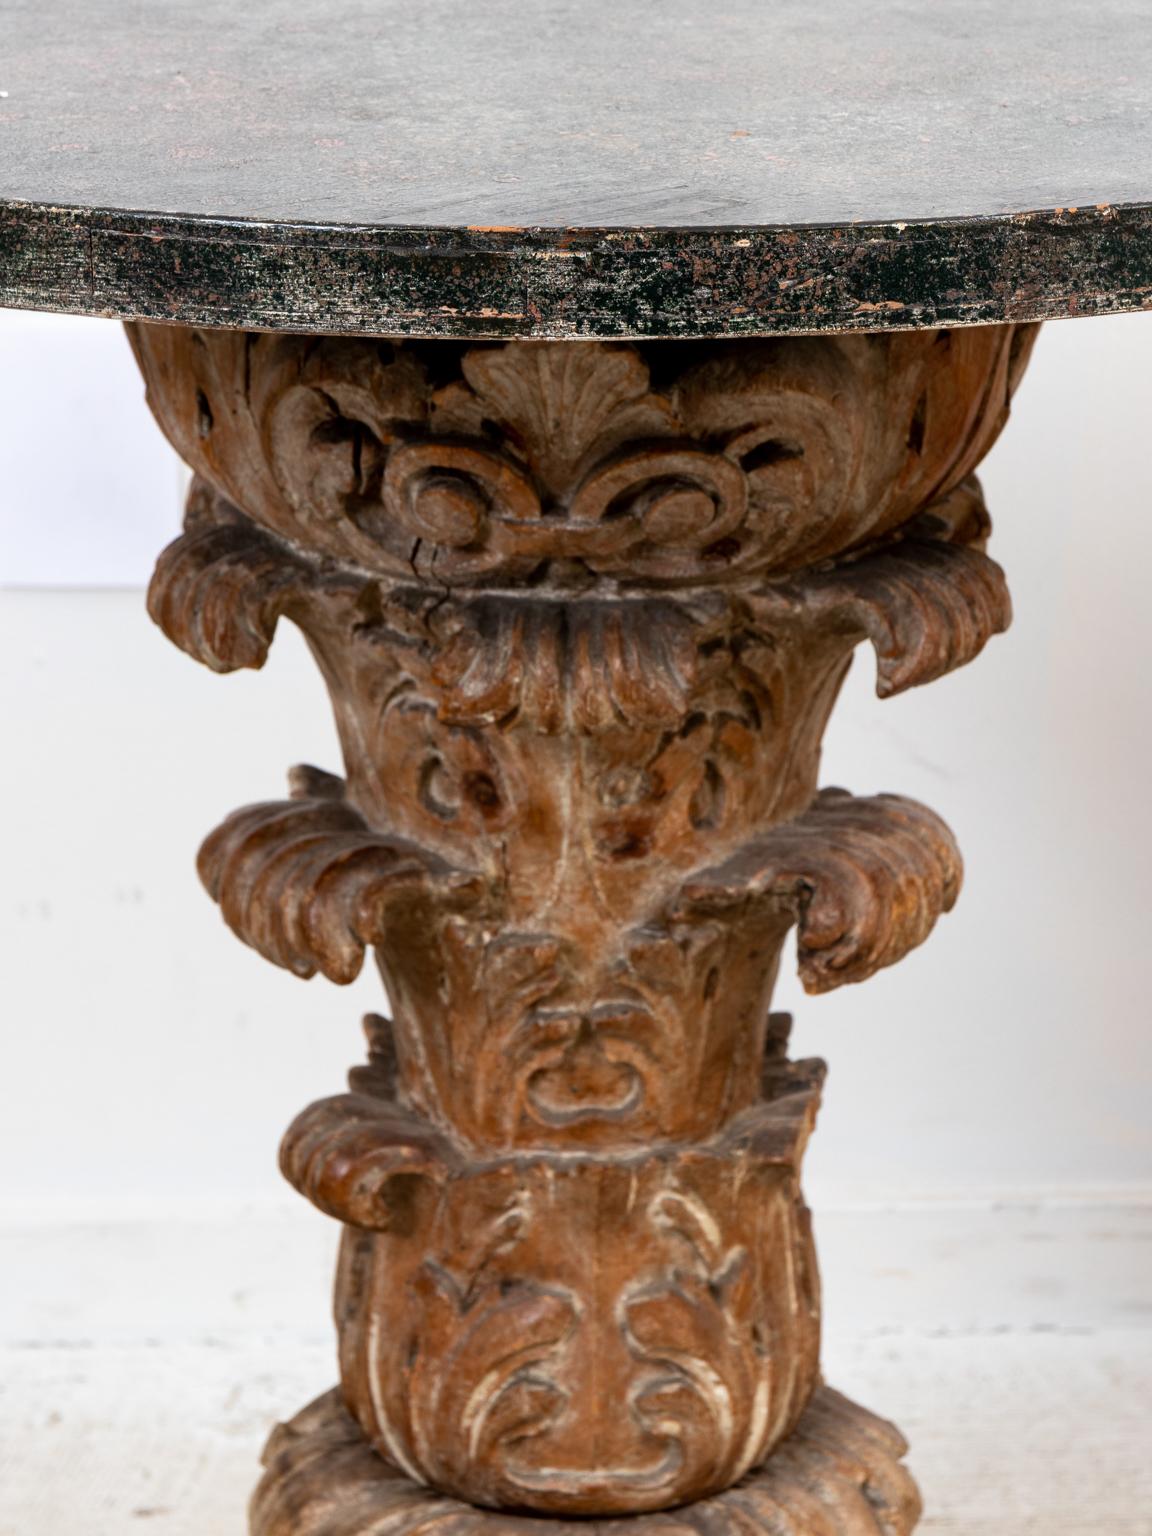 Circa 1900s pair of carved lime oak tables with faux marble painted top and base. The pieces are further detailed with a scrolled foliage motifs on the pedestal base. Please note of wear consistent with age. Available as each.